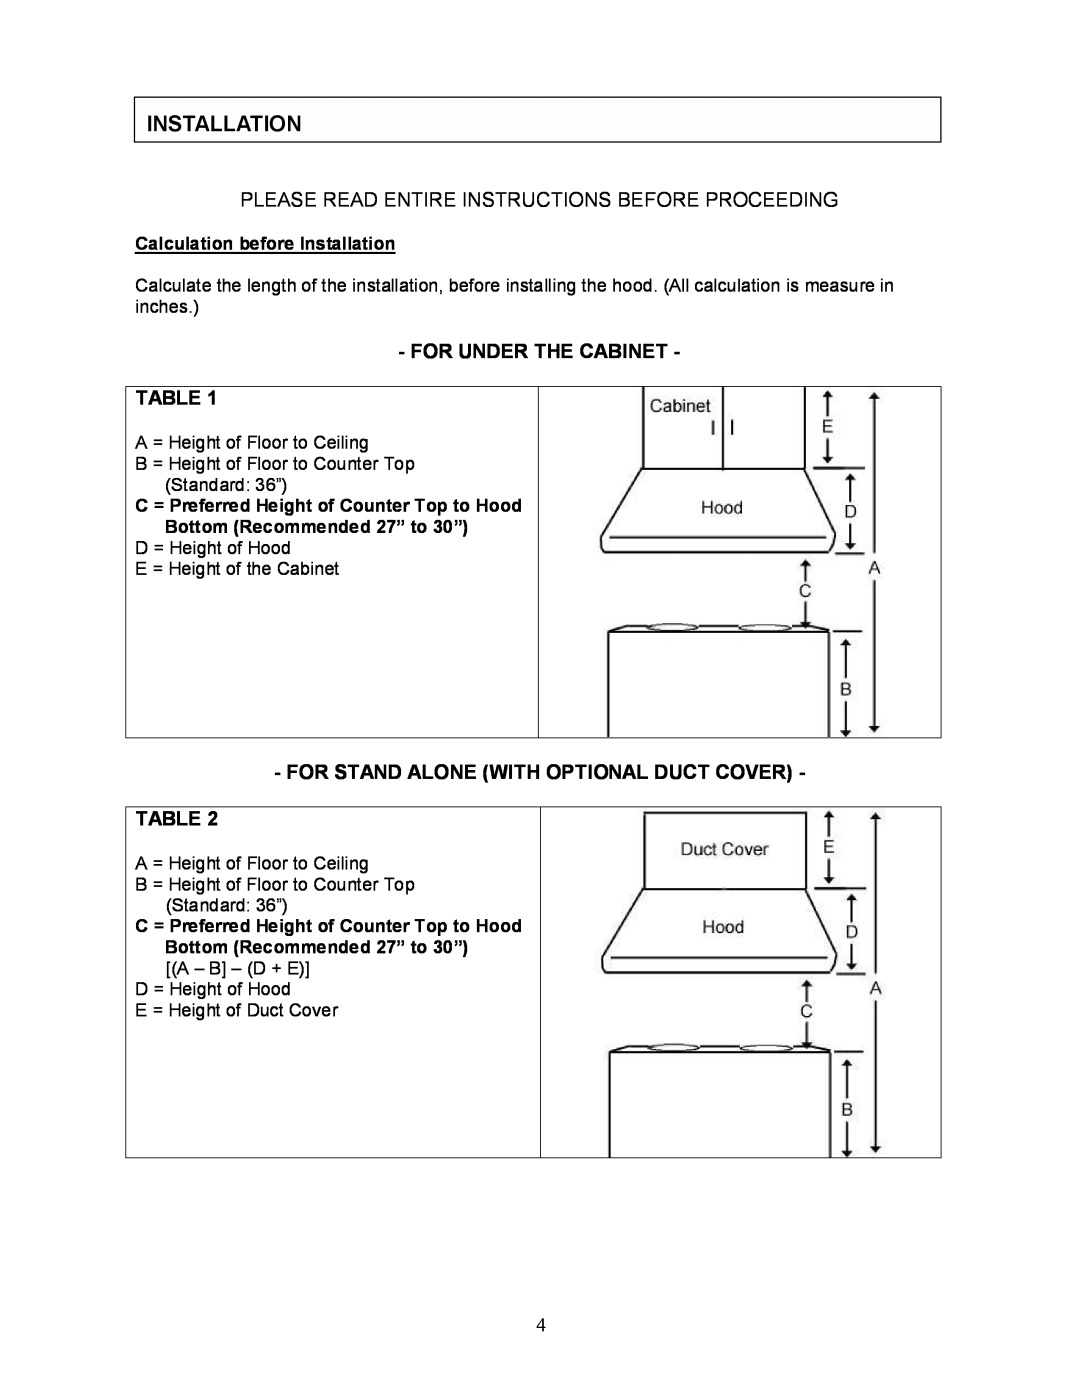 Kobe Range Hoods CH0030SQB manual Installation, Please Read Entire Instructions Before Proceeding, For Under The Cabinet 